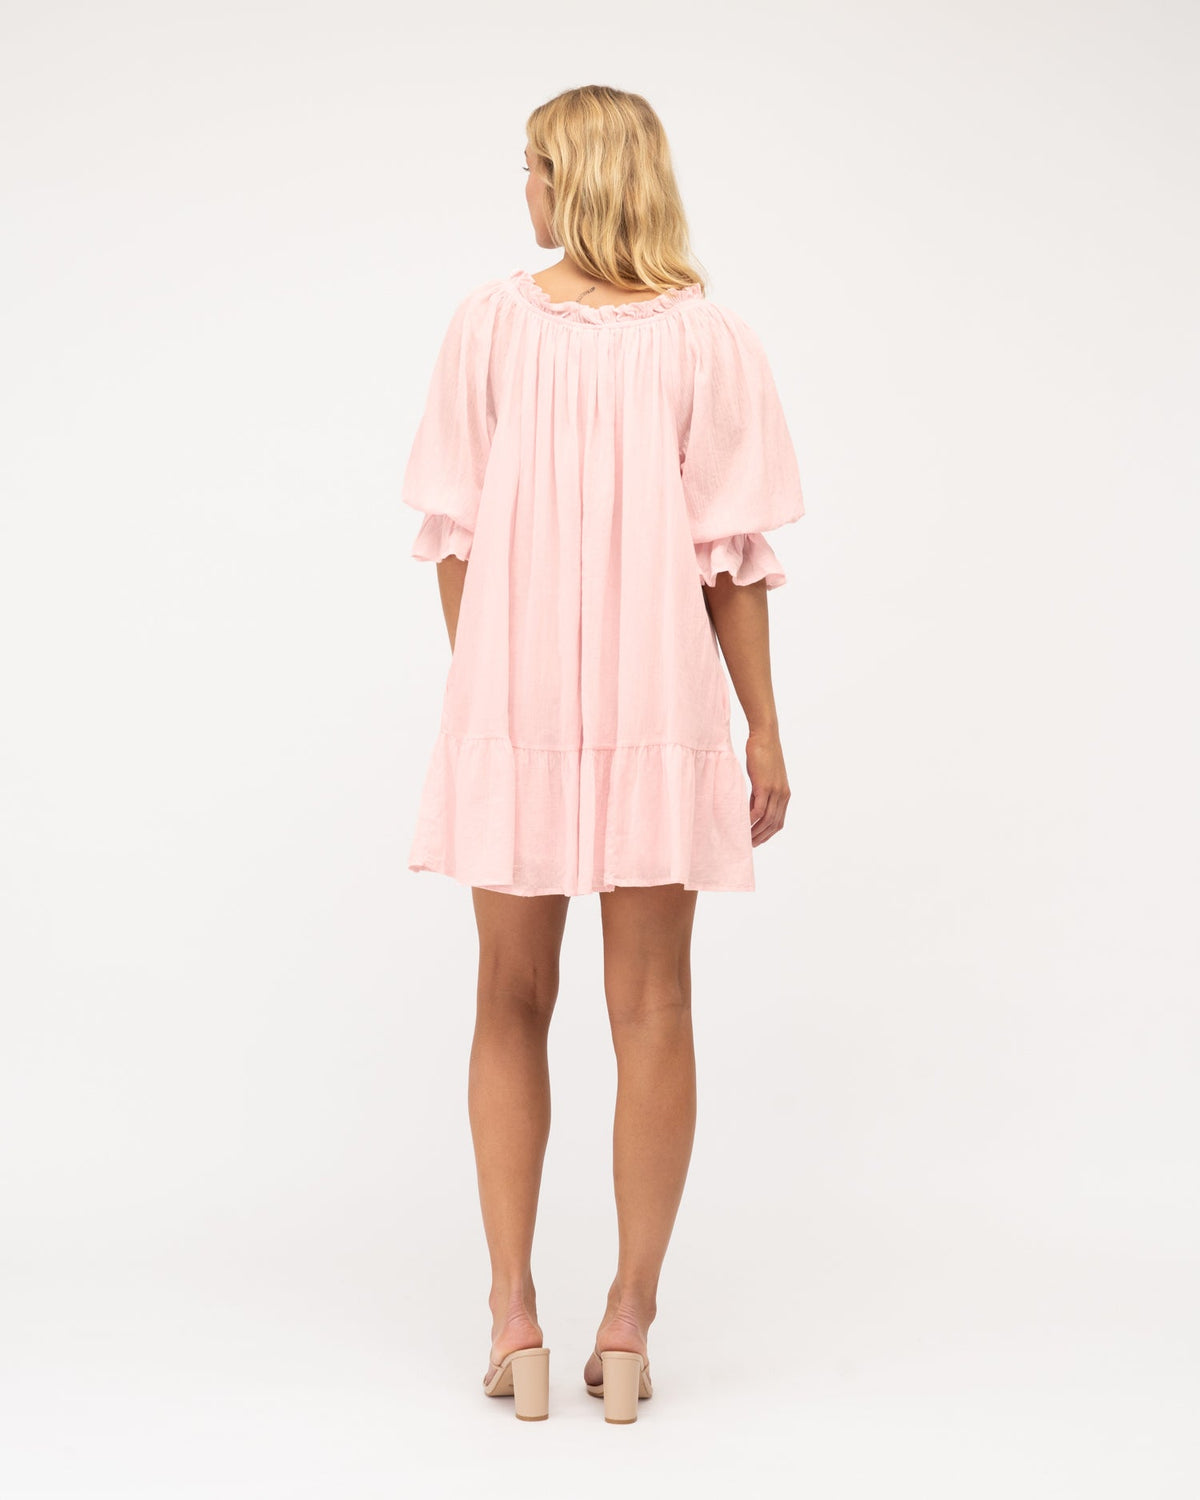 A model wearing a pink ruffle tiered dress and sandals. The dress is fully lined and has a skirt with frill. Pink dress is from the Ebby and I collection designed by Global Fashion House. 